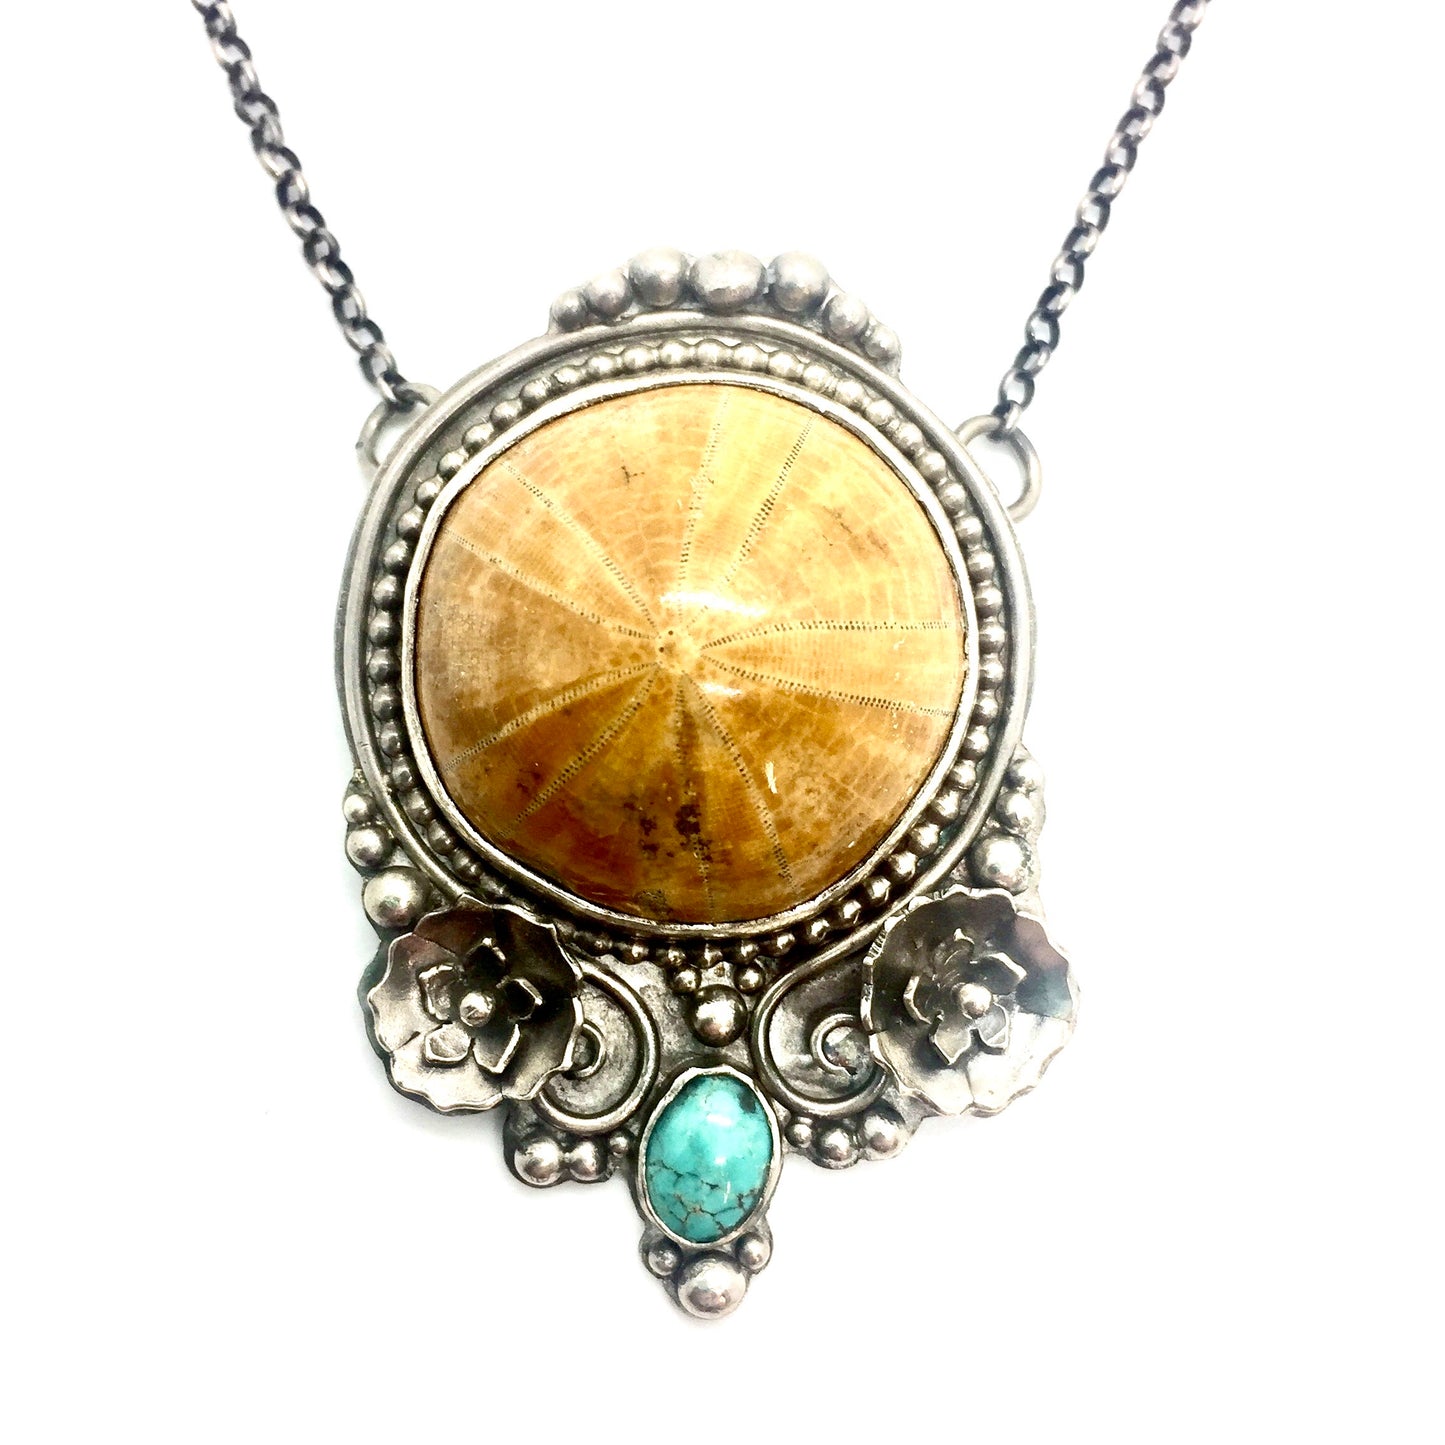 Fossilized Sea Urchin & Turquoise Flower Necklace in Sterling Silver